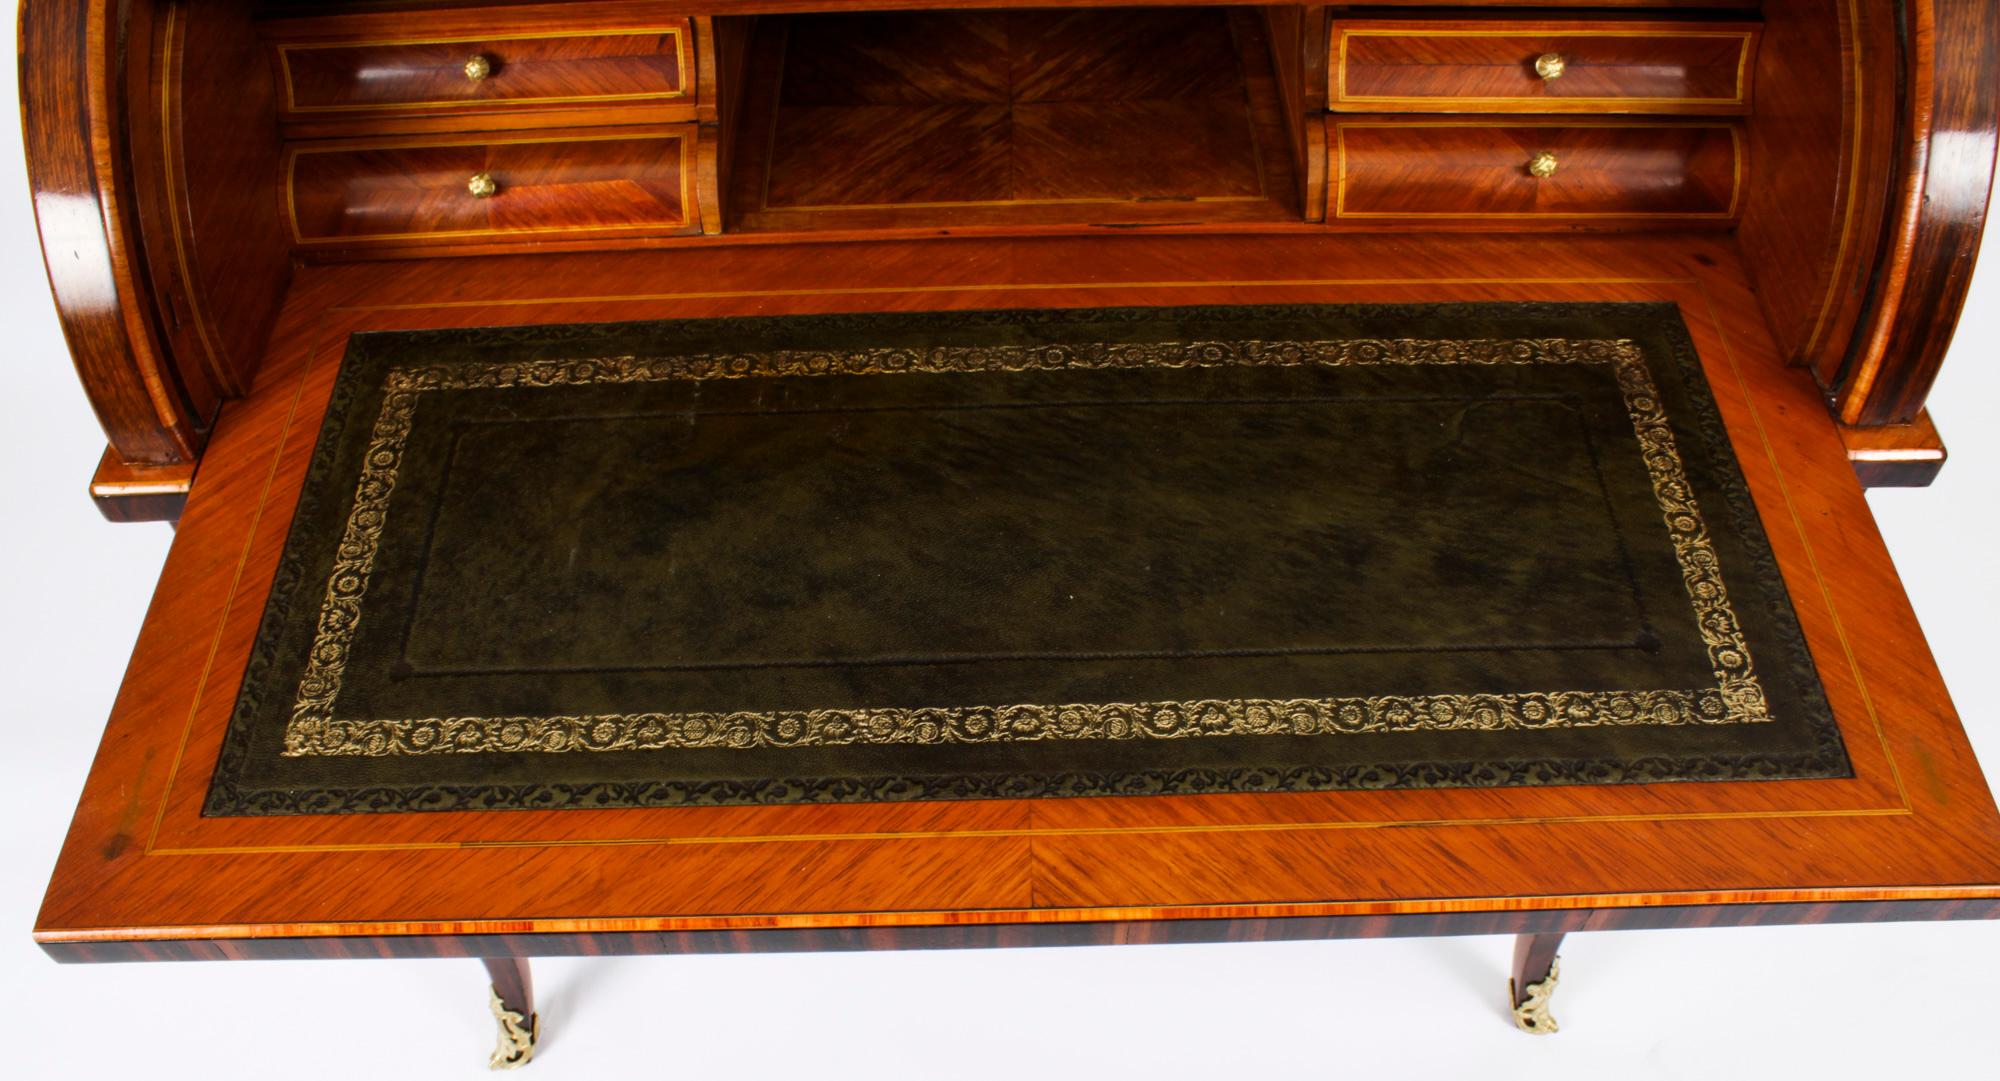 Wood Antique French Louis Revival Marquetry Bureau, 19th Century